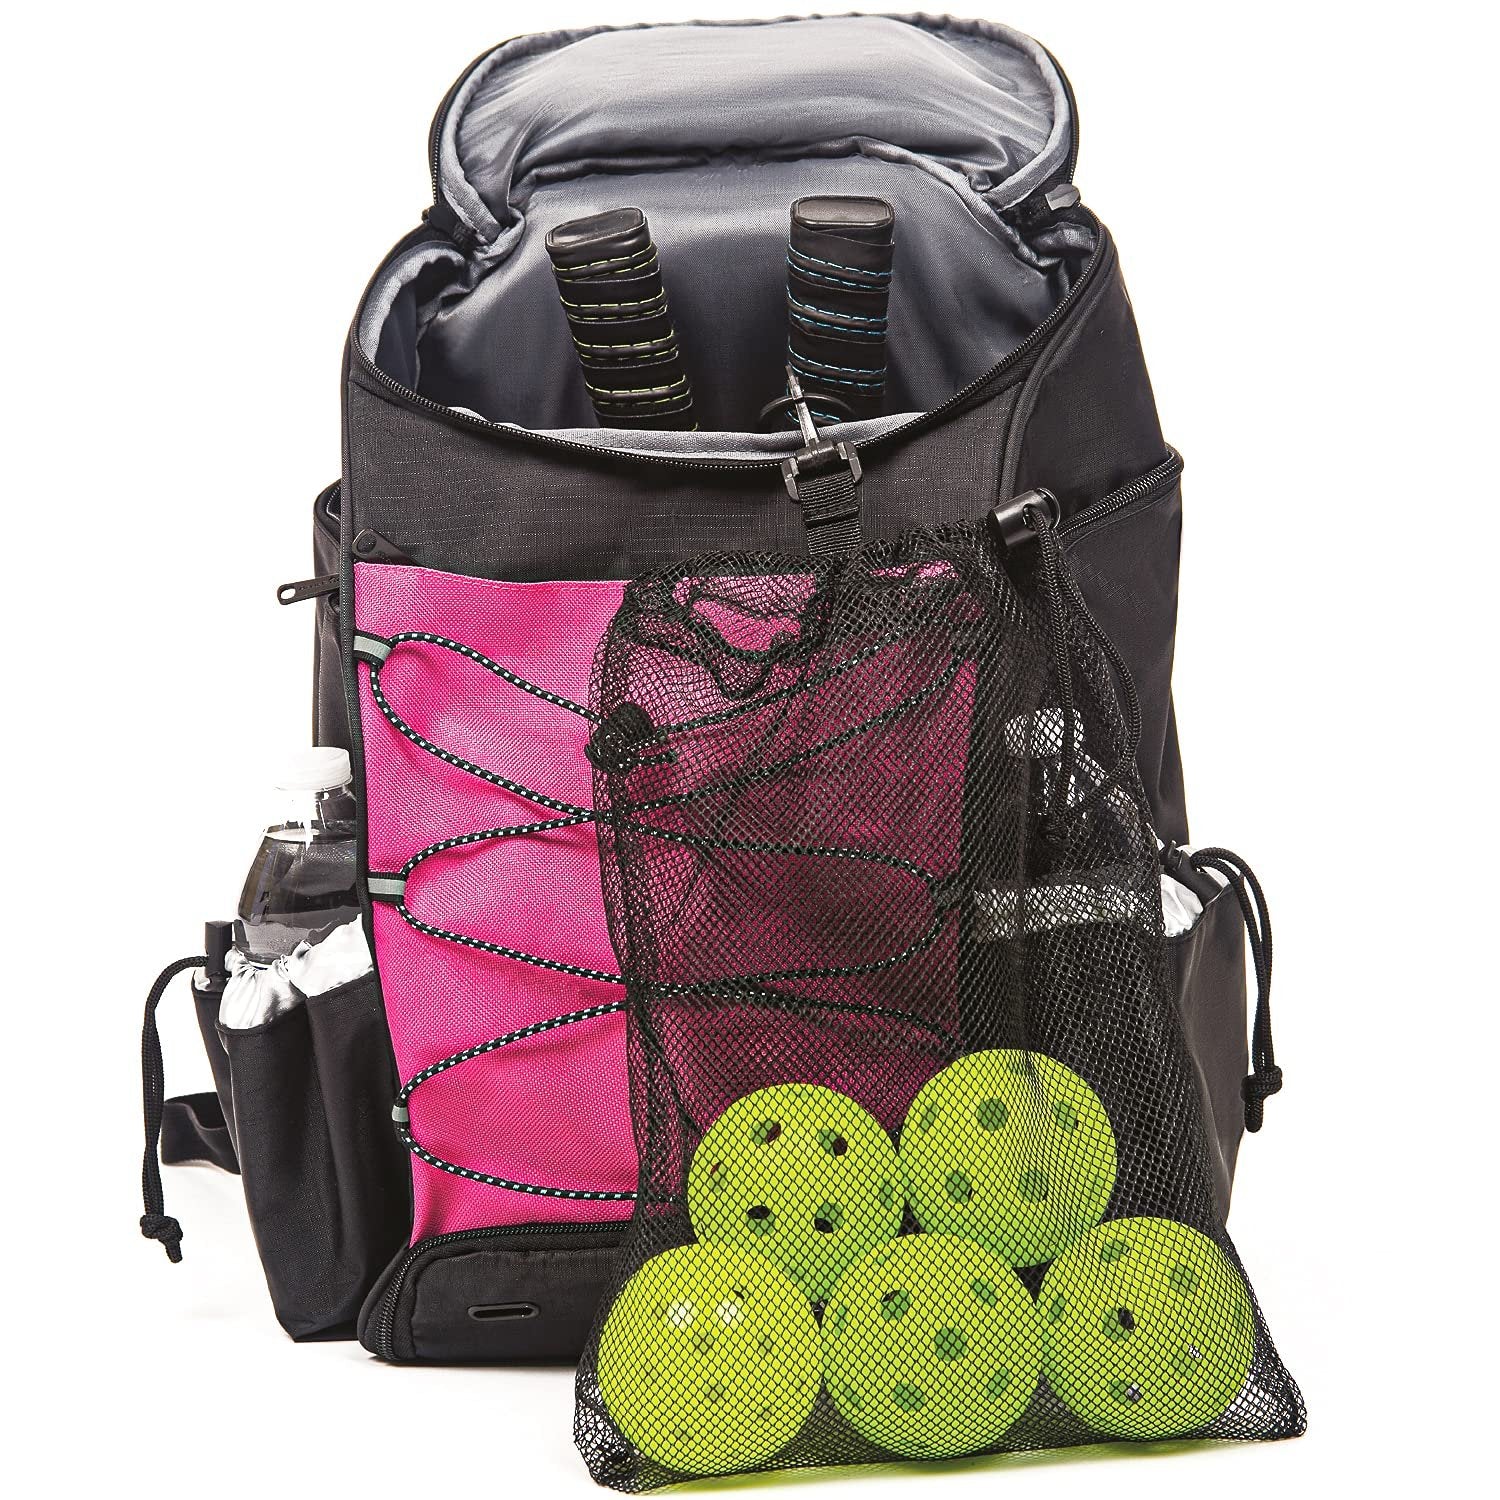 Athletico Pickleball Backpack - Large Pink Bag w/ Ball Holder - Free Shipping & Returns